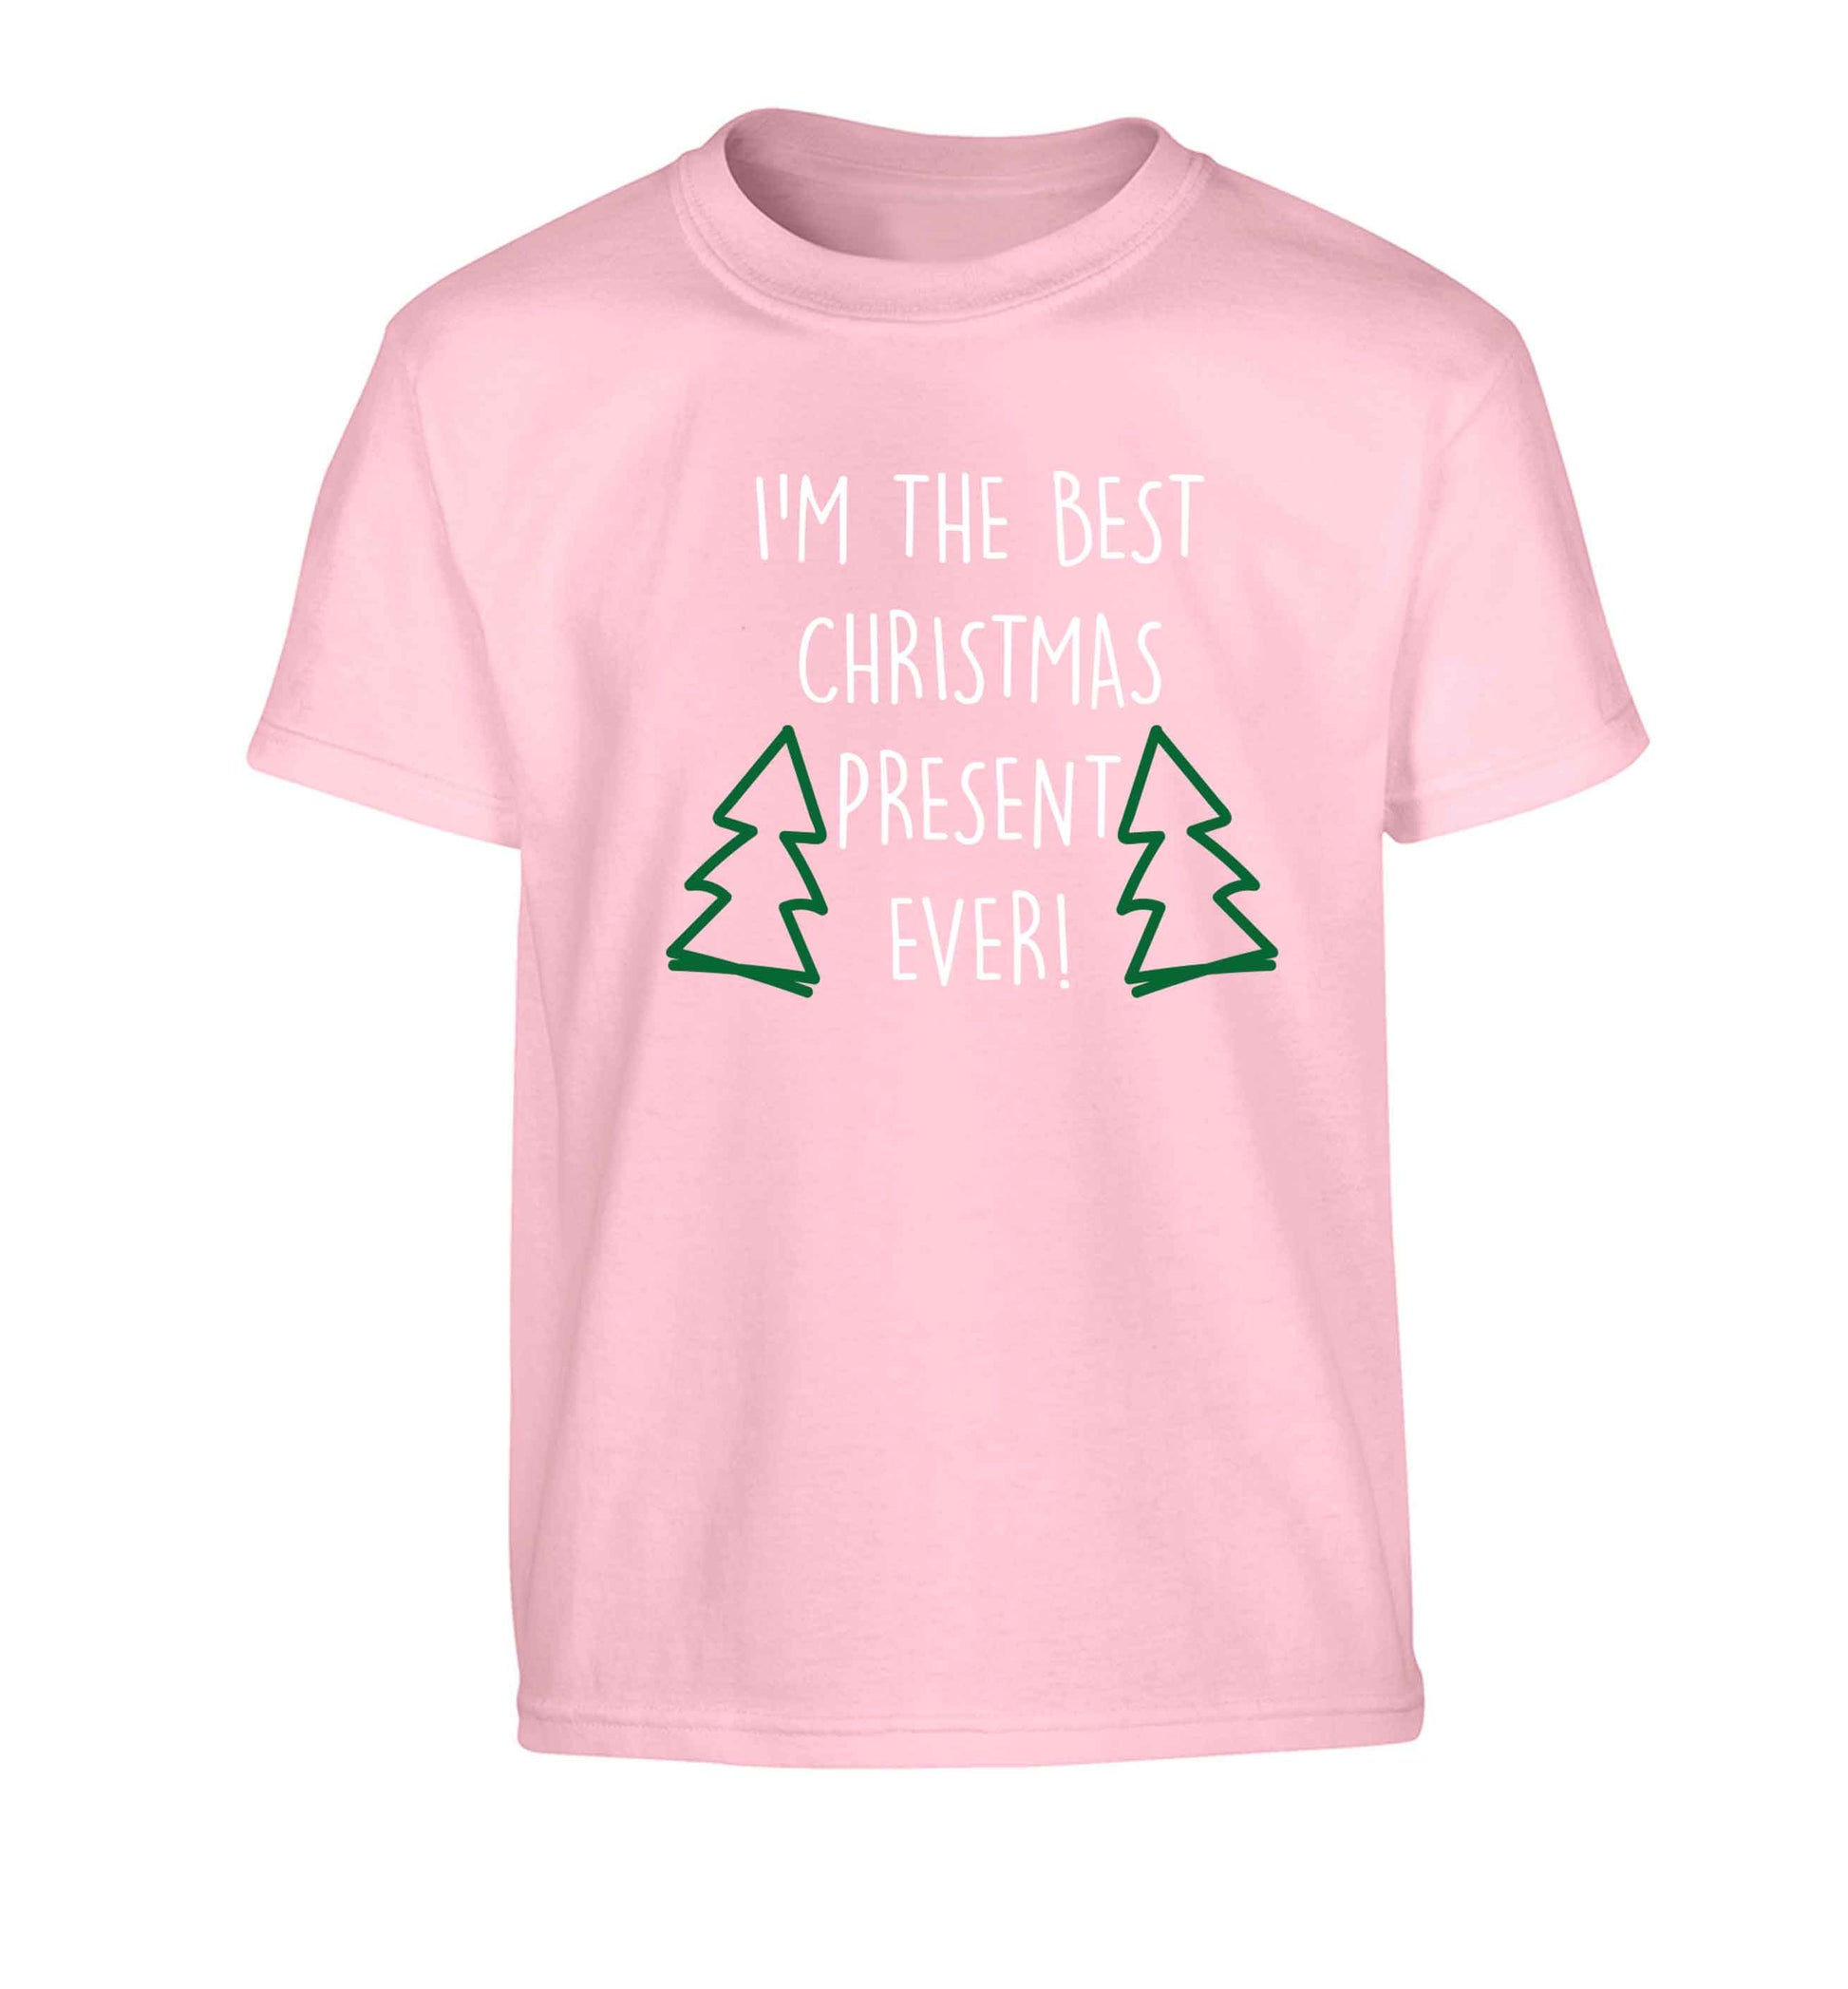 I'm the best Christmas present ever Children's light pink Tshirt 12-13 Years